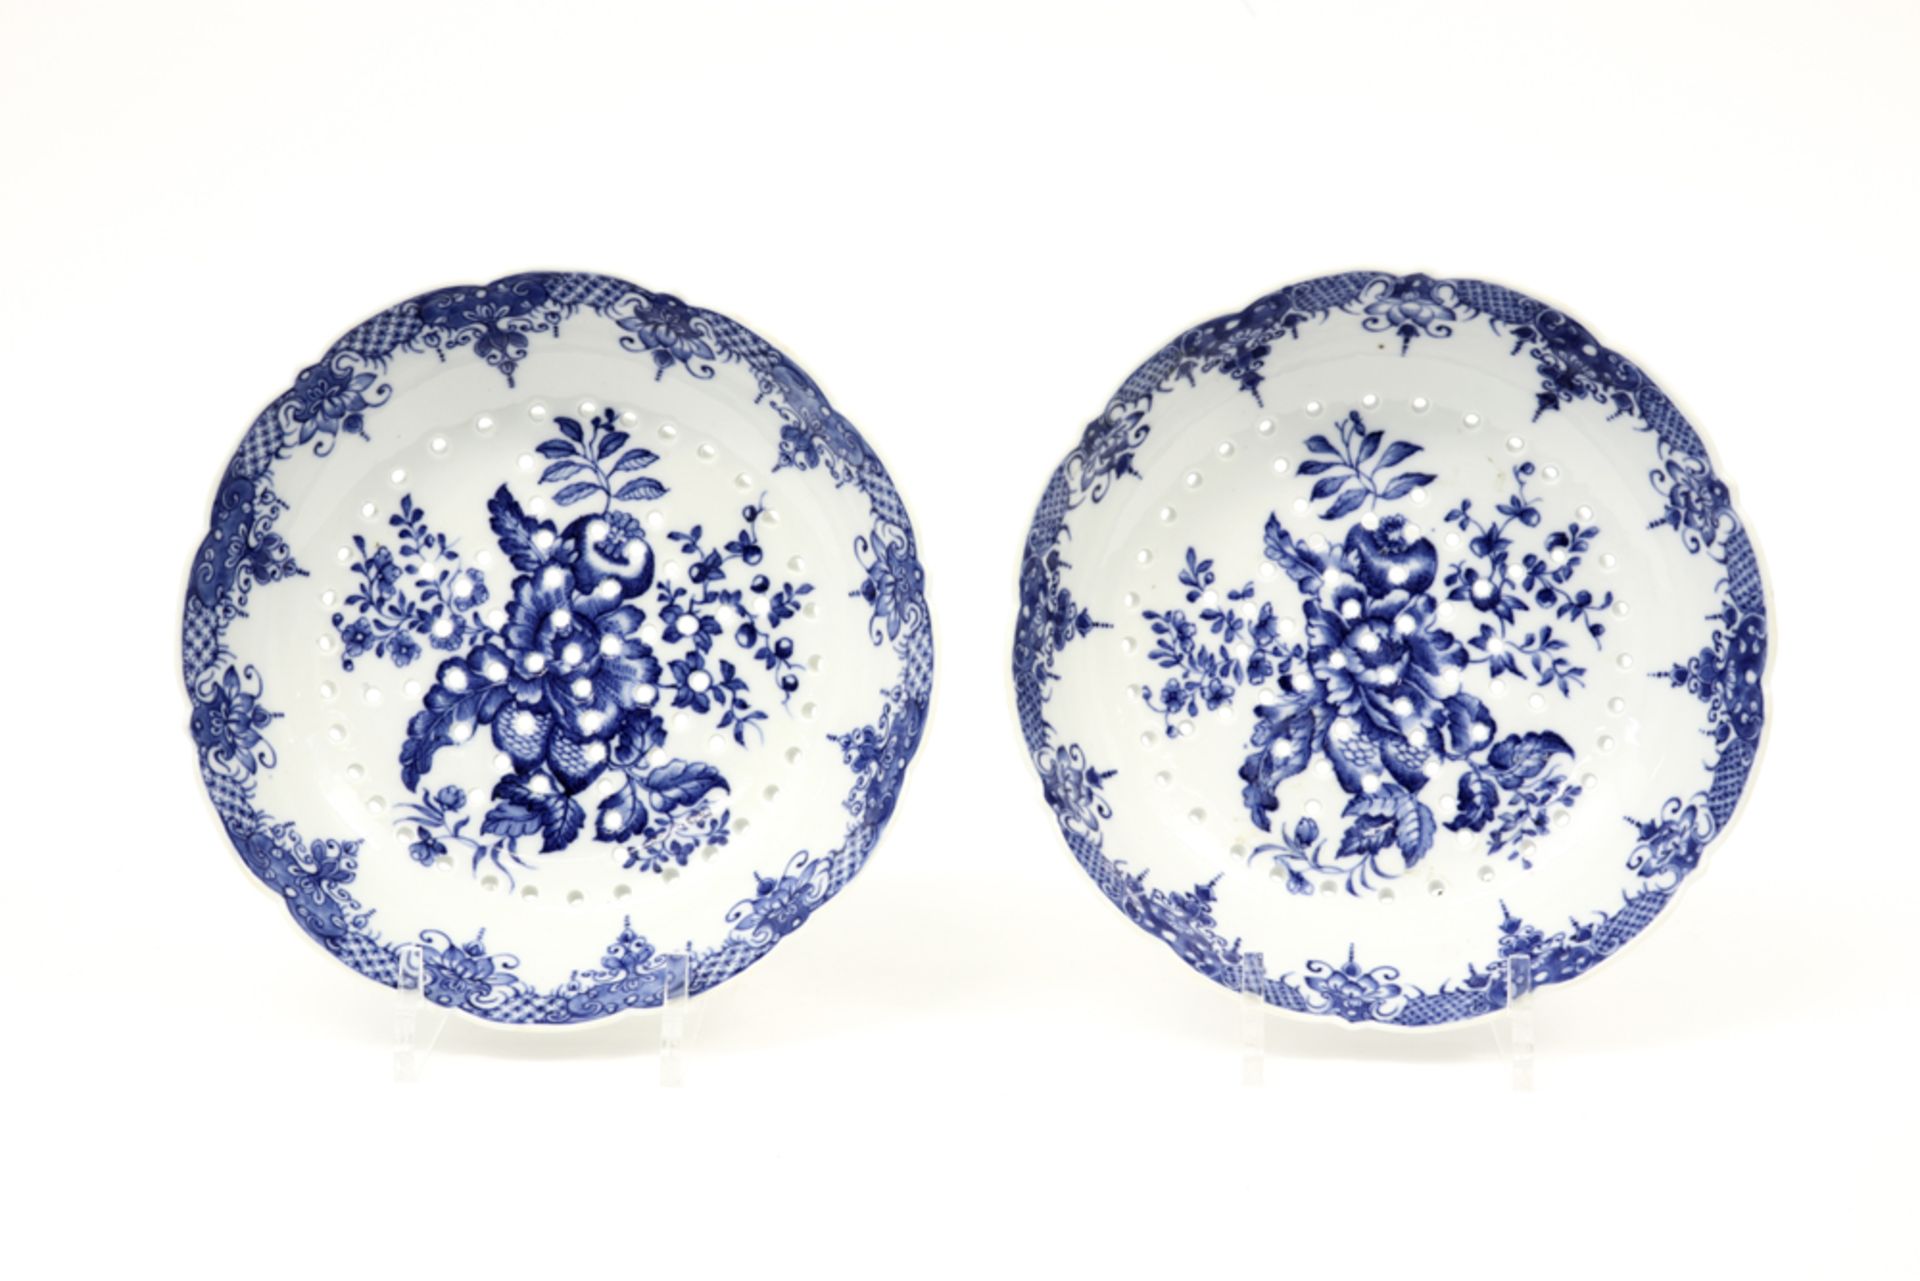 pair of 18th Cent. fruit colanders in Chinese porcelain with a blue-white flower decor || Paar